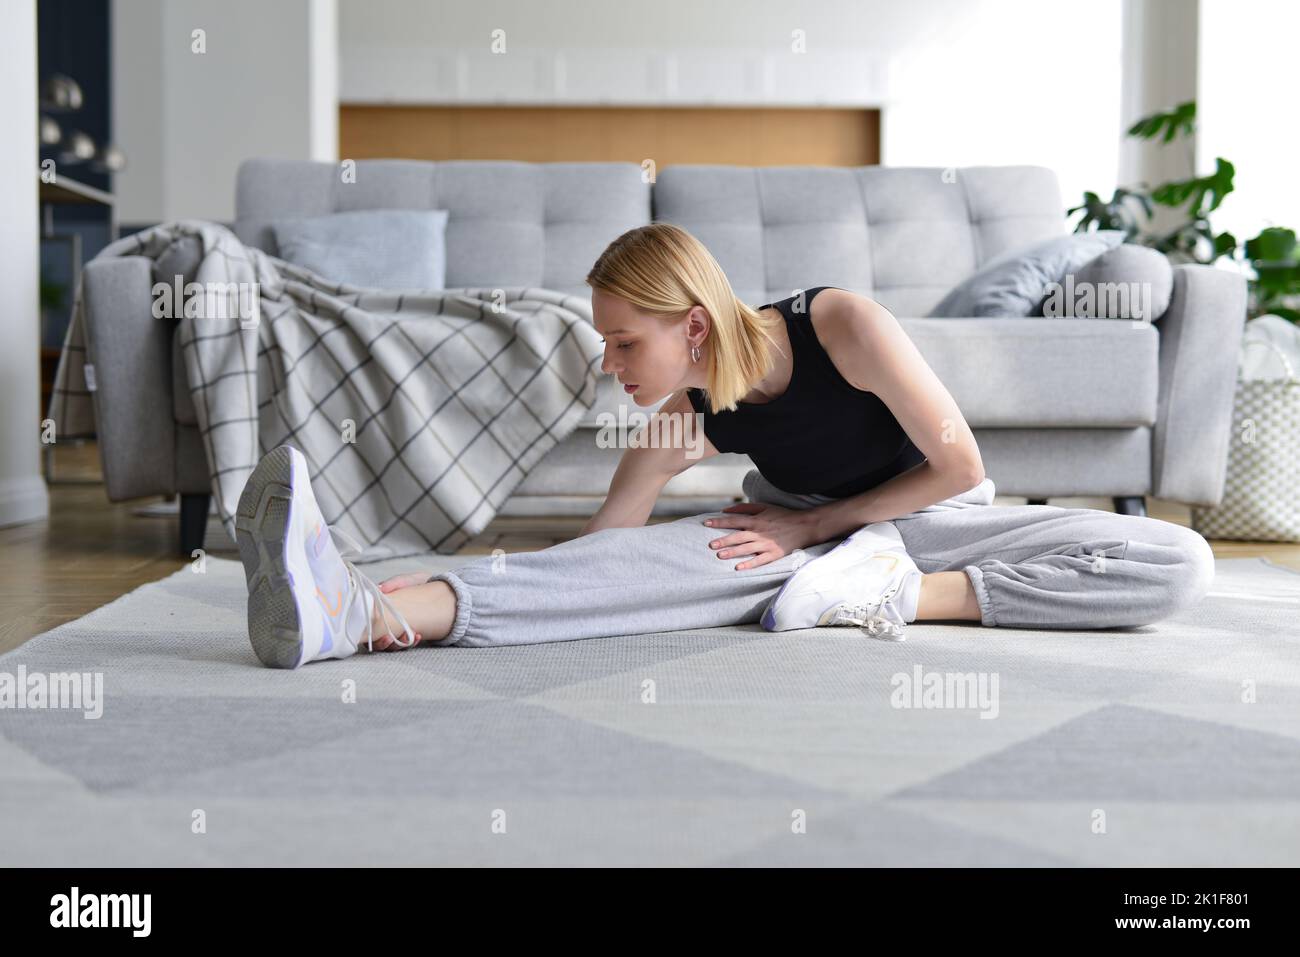 Woman doing stretching exercise at home. Stock Photo